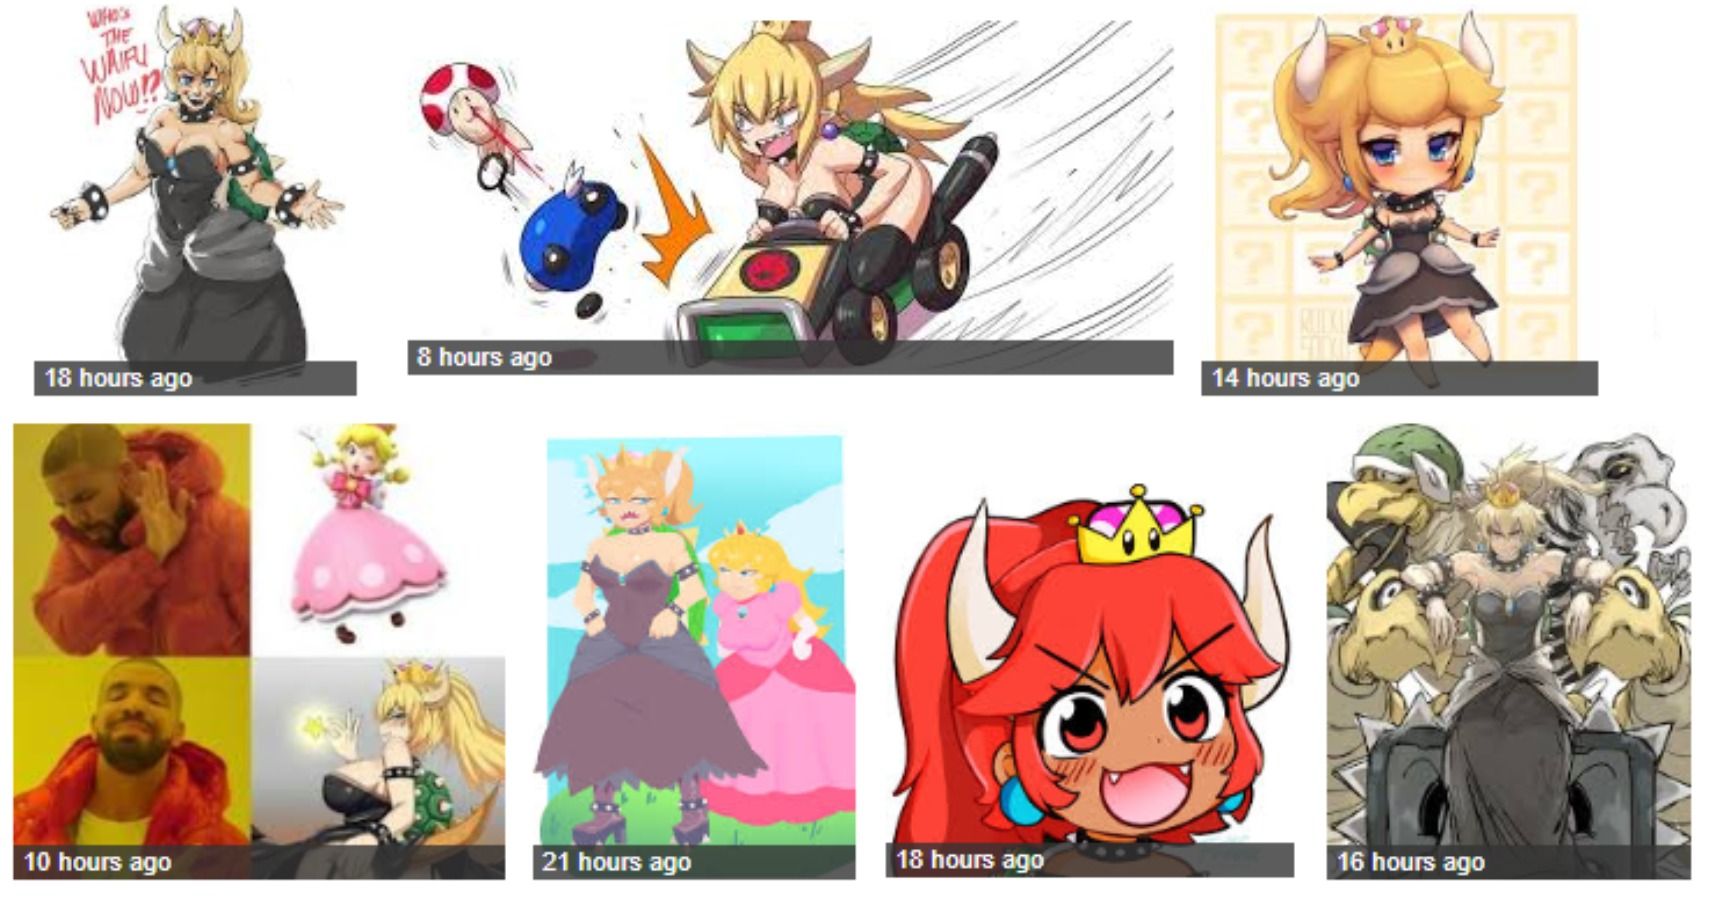 Bowsette  The Horrifying Fusion Of Bowser And Peach  Has Taken Over DeviantArt